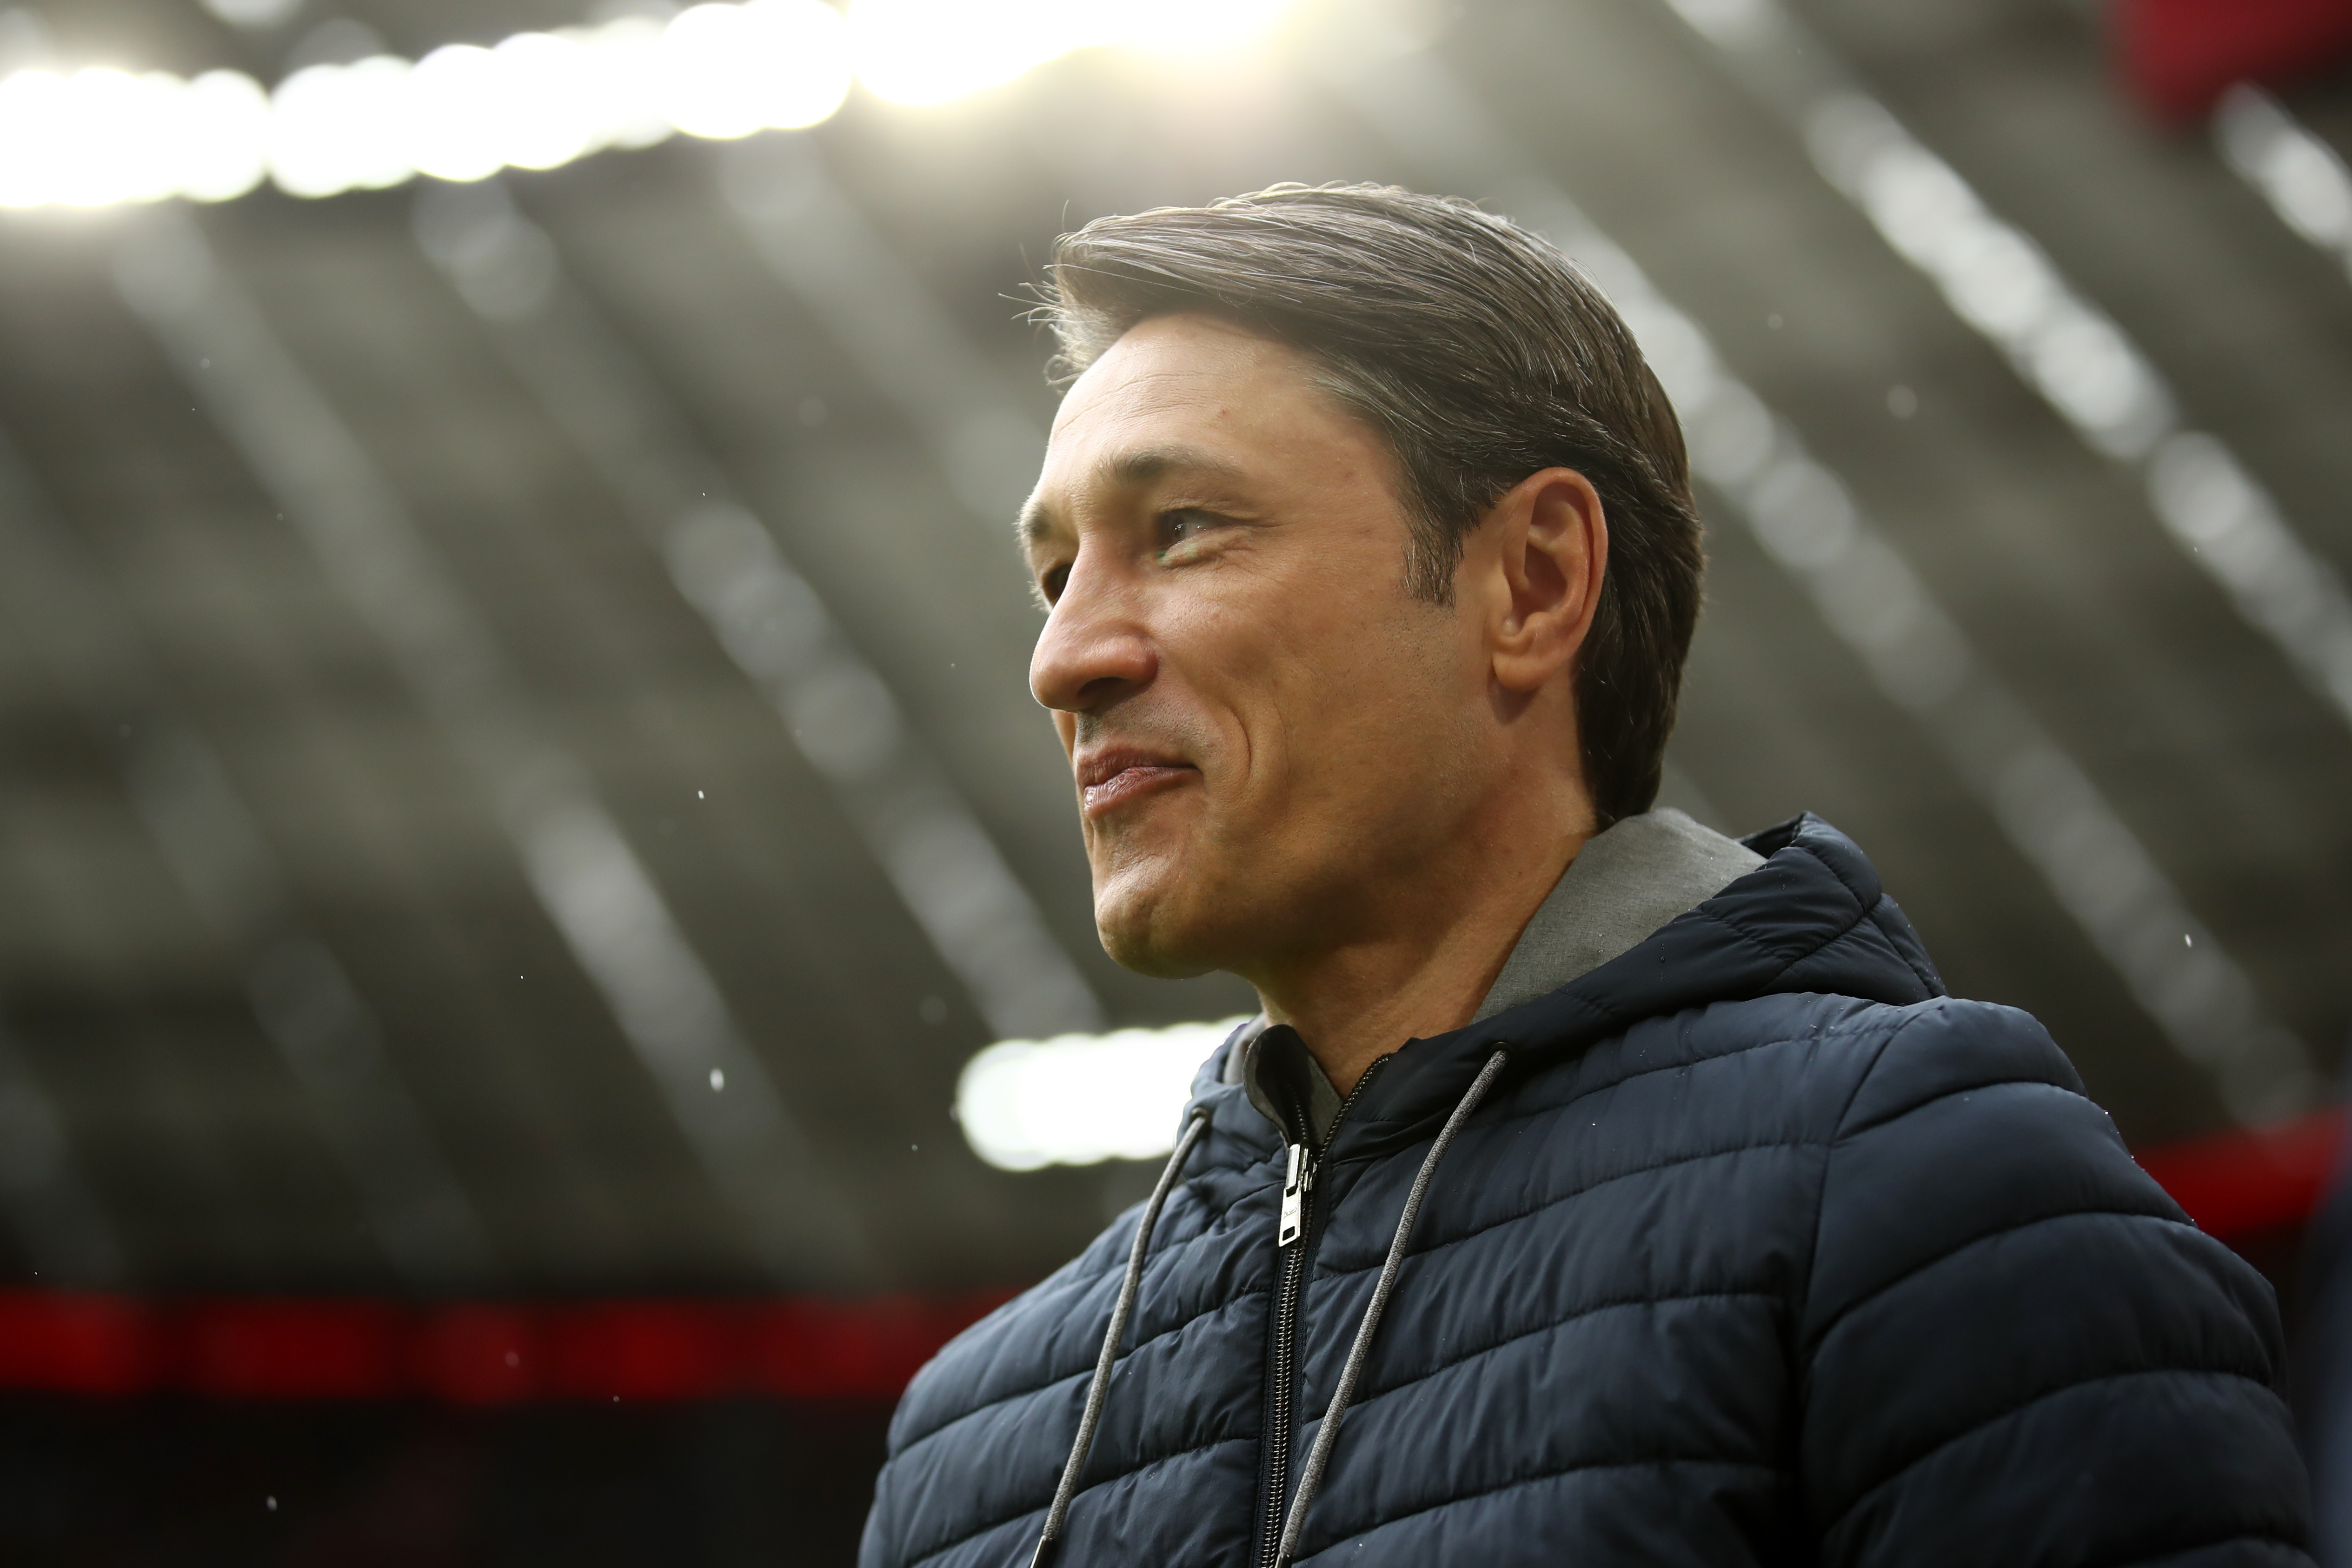 MUNICH, GERMANY - MAY 04: Niko Kovac, Manager of Bayern Munich looks on prior to the Bundesliga match between FC Bayern Muenchen and Hannover 96 at Allianz Arena on May 04, 2019 in Munich, Germany. (Photo by Alex Grimm/Bongarts/Getty Images)